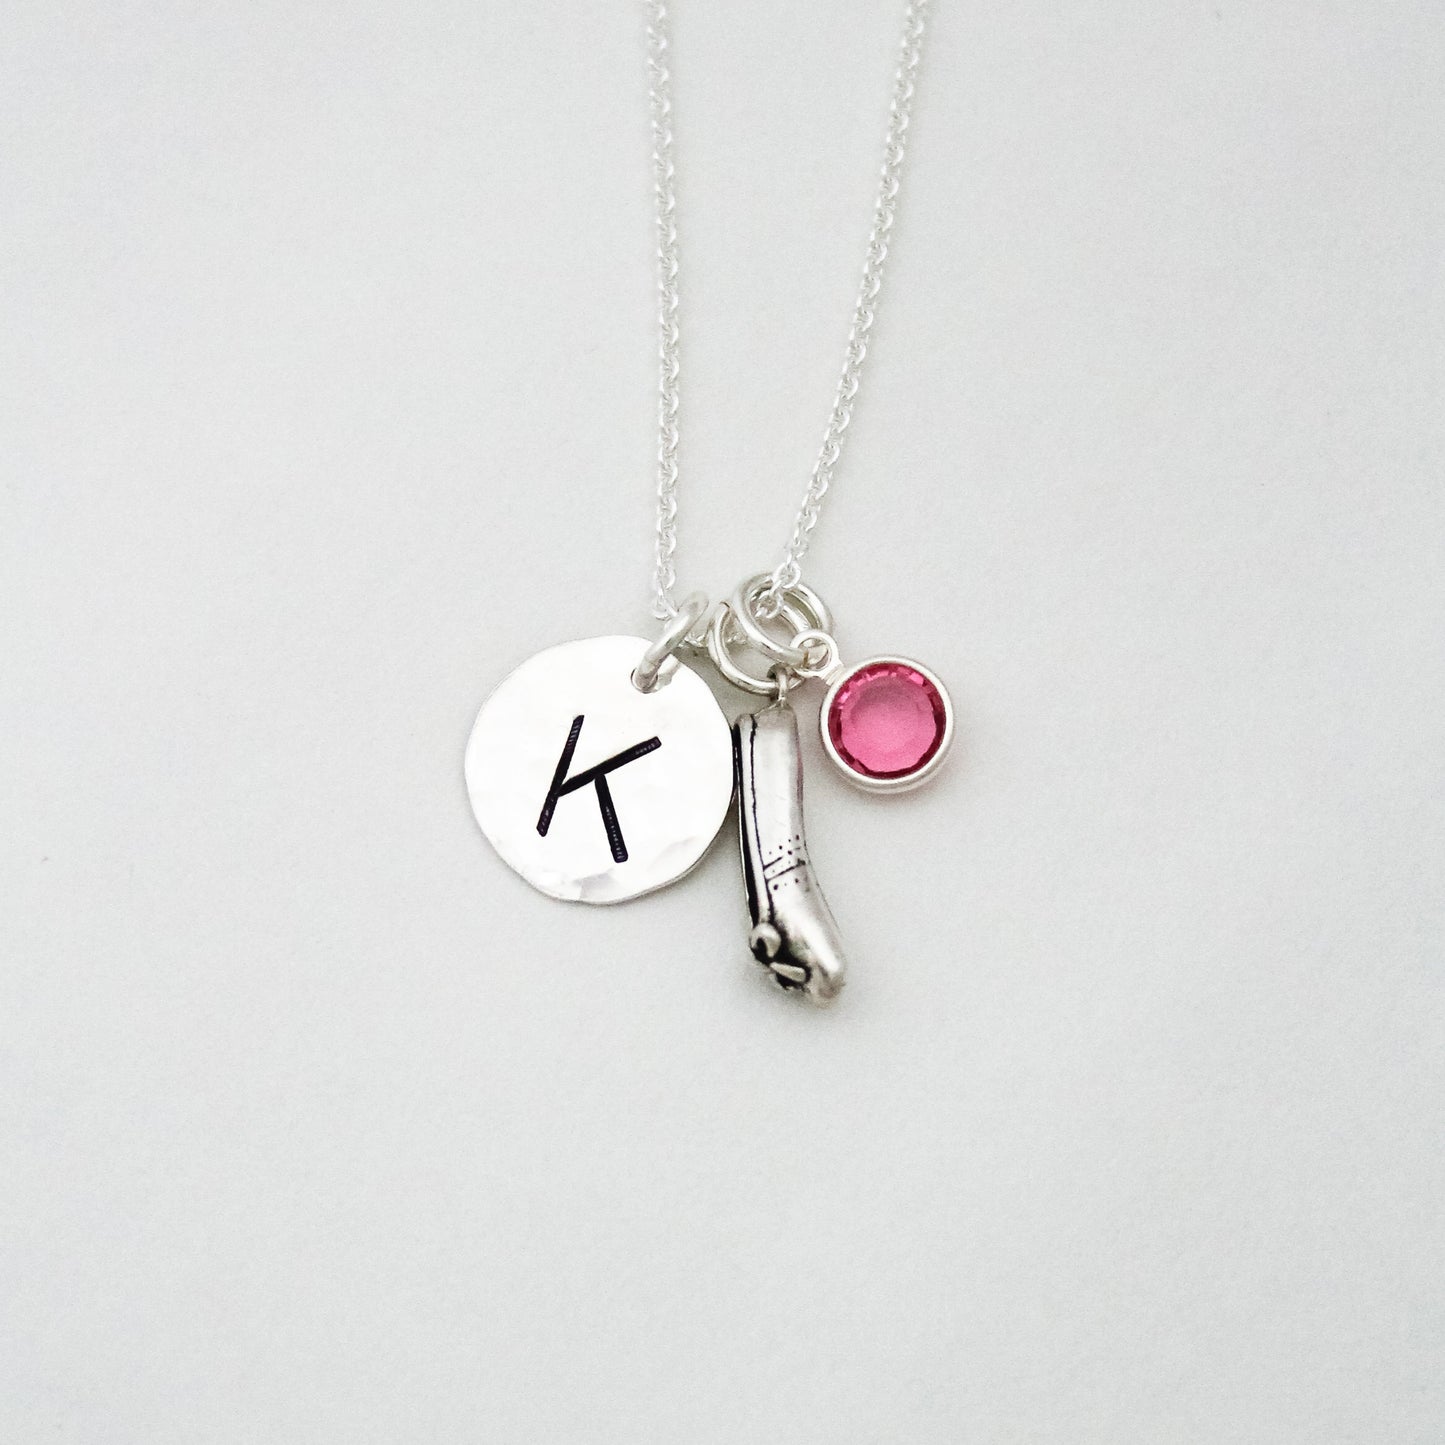 Dancer Charm Necklace, Dance Necklace, Dance Gift, Dancer Gift, Dance Recital Gift, Tap, Irish, Hula Dance, Ballet, Personalized Jewelry